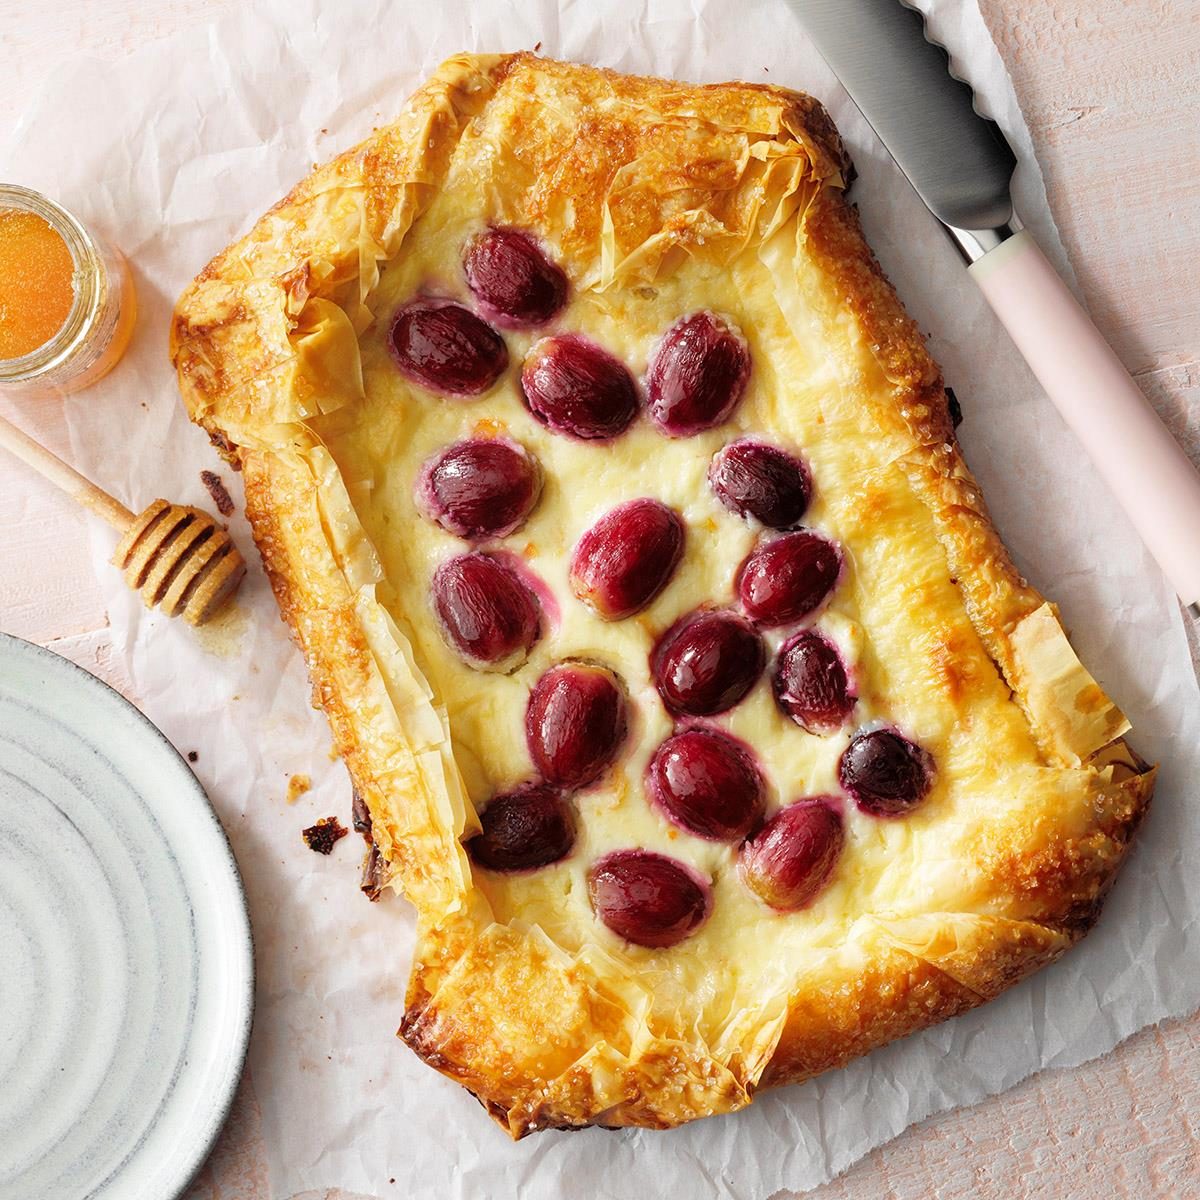 https://www.tasteofhome.com/wp-content/uploads/2021/03/Roasted-Grape-and-Sweet-Cheese-Phyllo-Galette_EXPS_RC21_257041_E02_19_11b.jpg